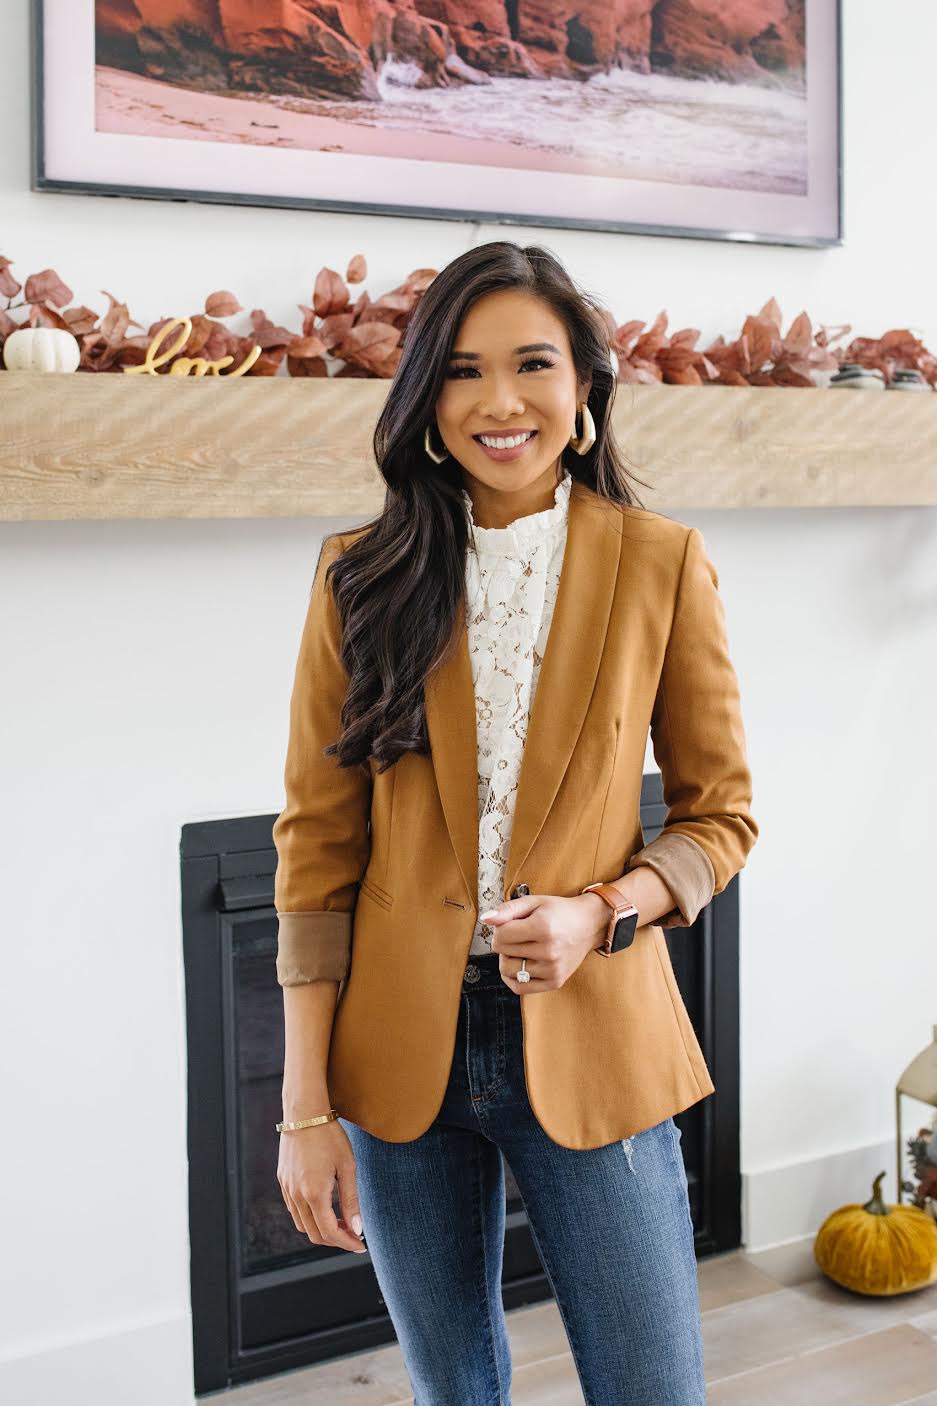 Blogger Hoang-Kim Cung shares business casual attire for women including the j.crew parke blazer and wayf erika puff sleeve top